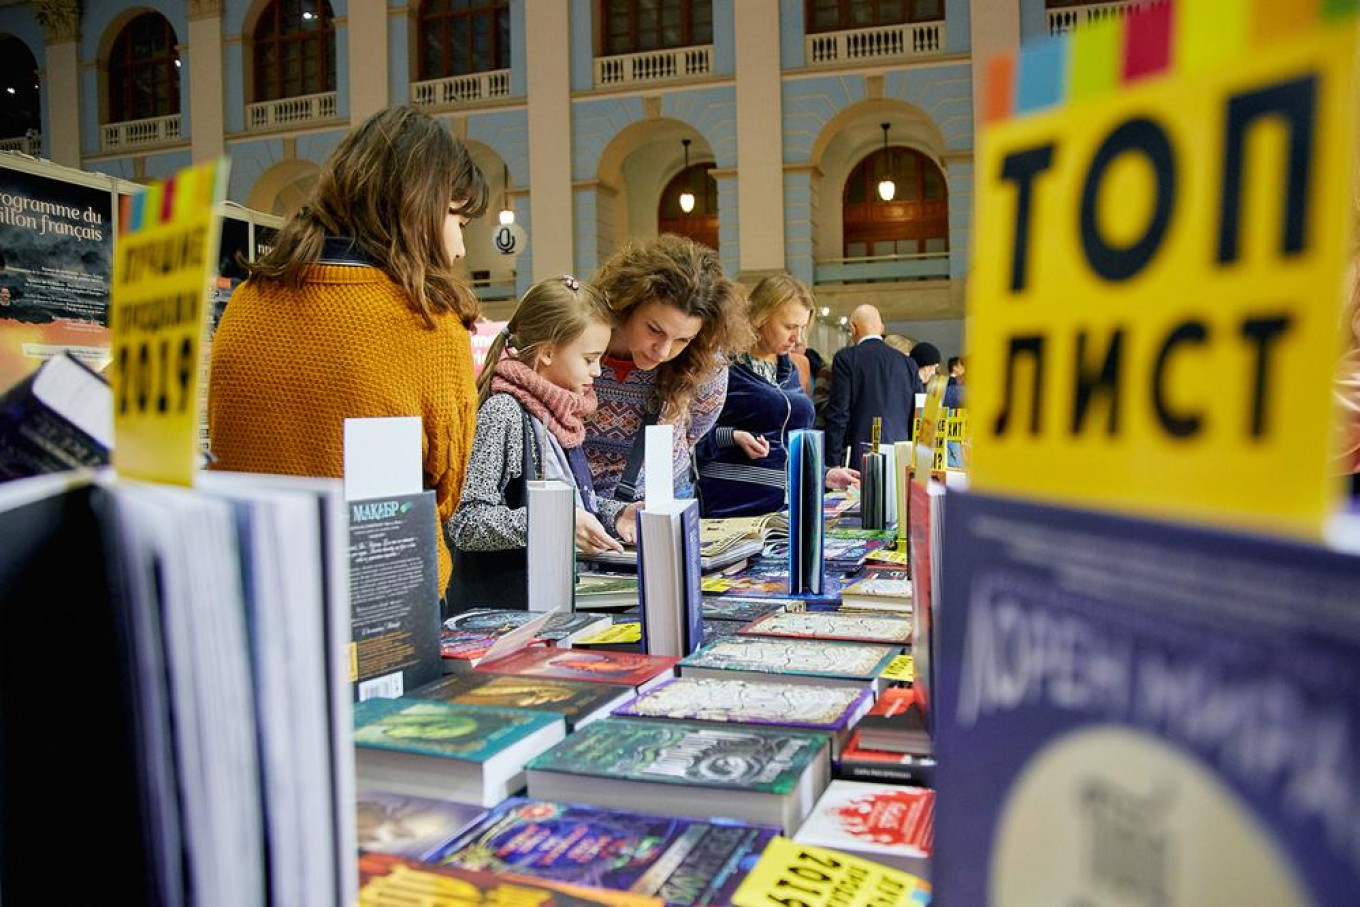 Moscow Non/Fiction Book Fair Goes Online with Belarusian Nobel Prize Winner Aleksievich